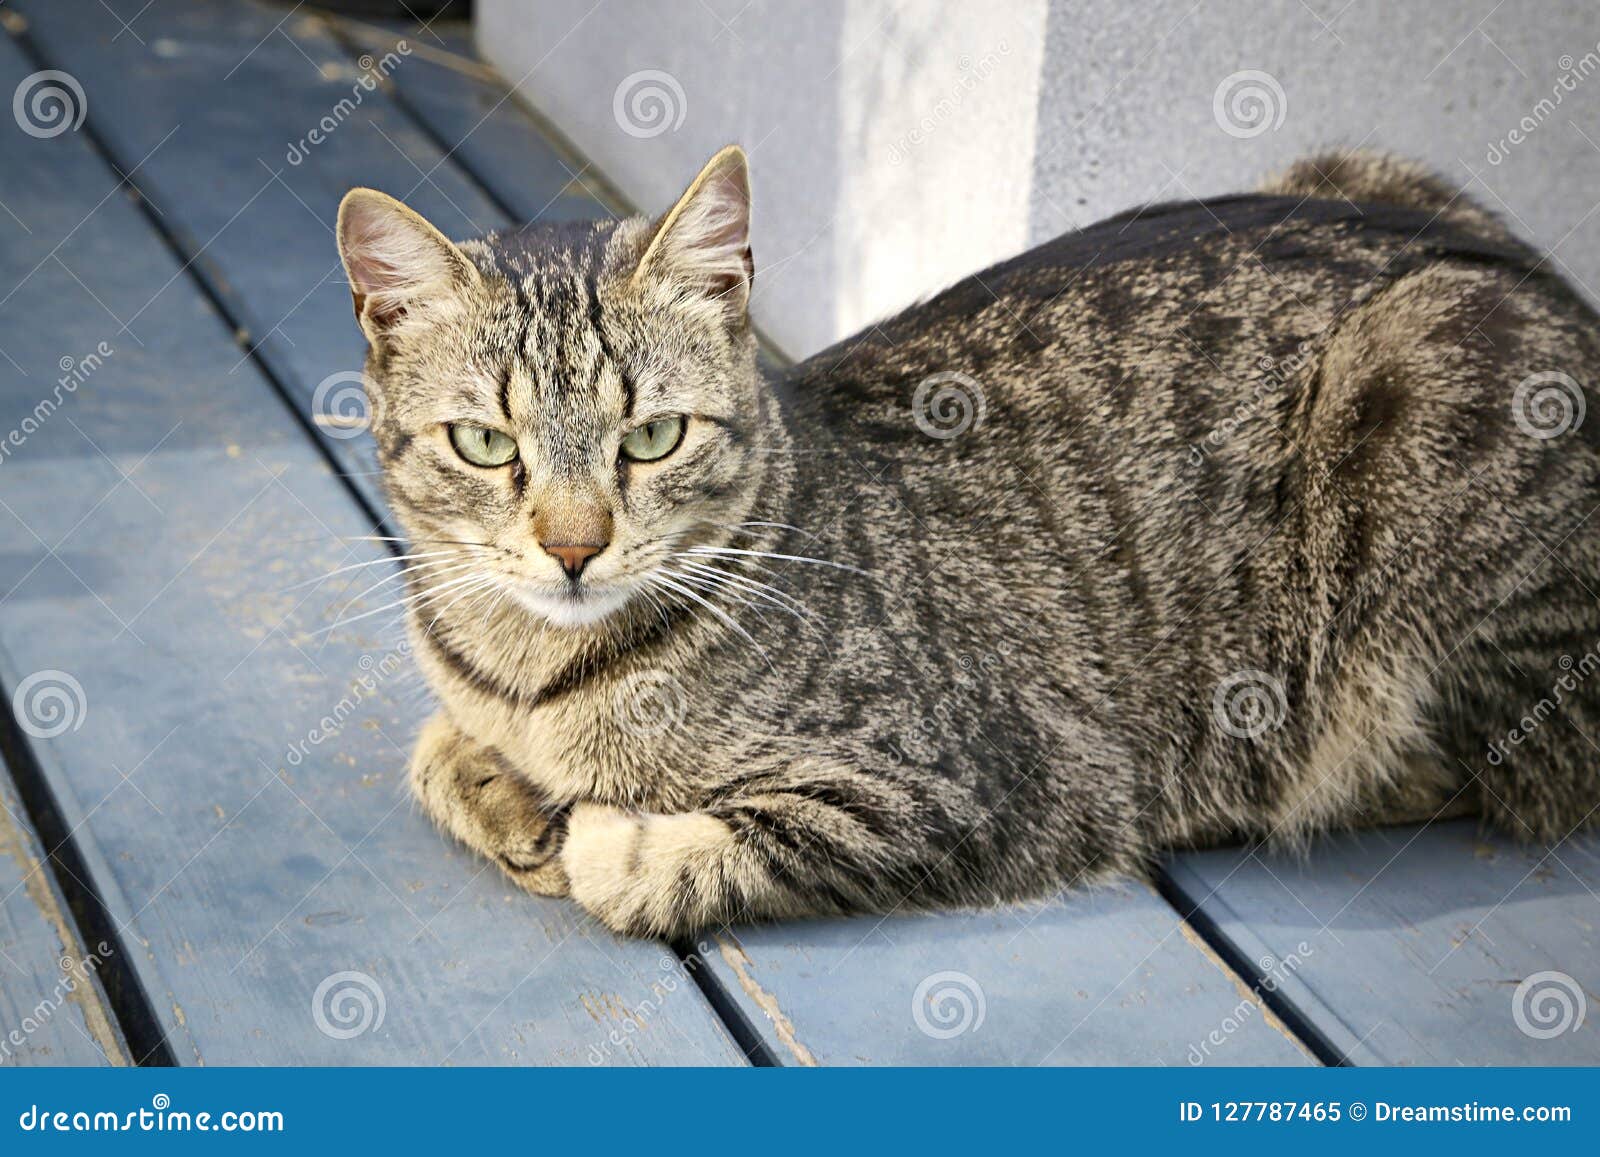 Tiger Cat Kitty Lying Looking Sweet Stock Image - Image of stripes, grey:  127787465